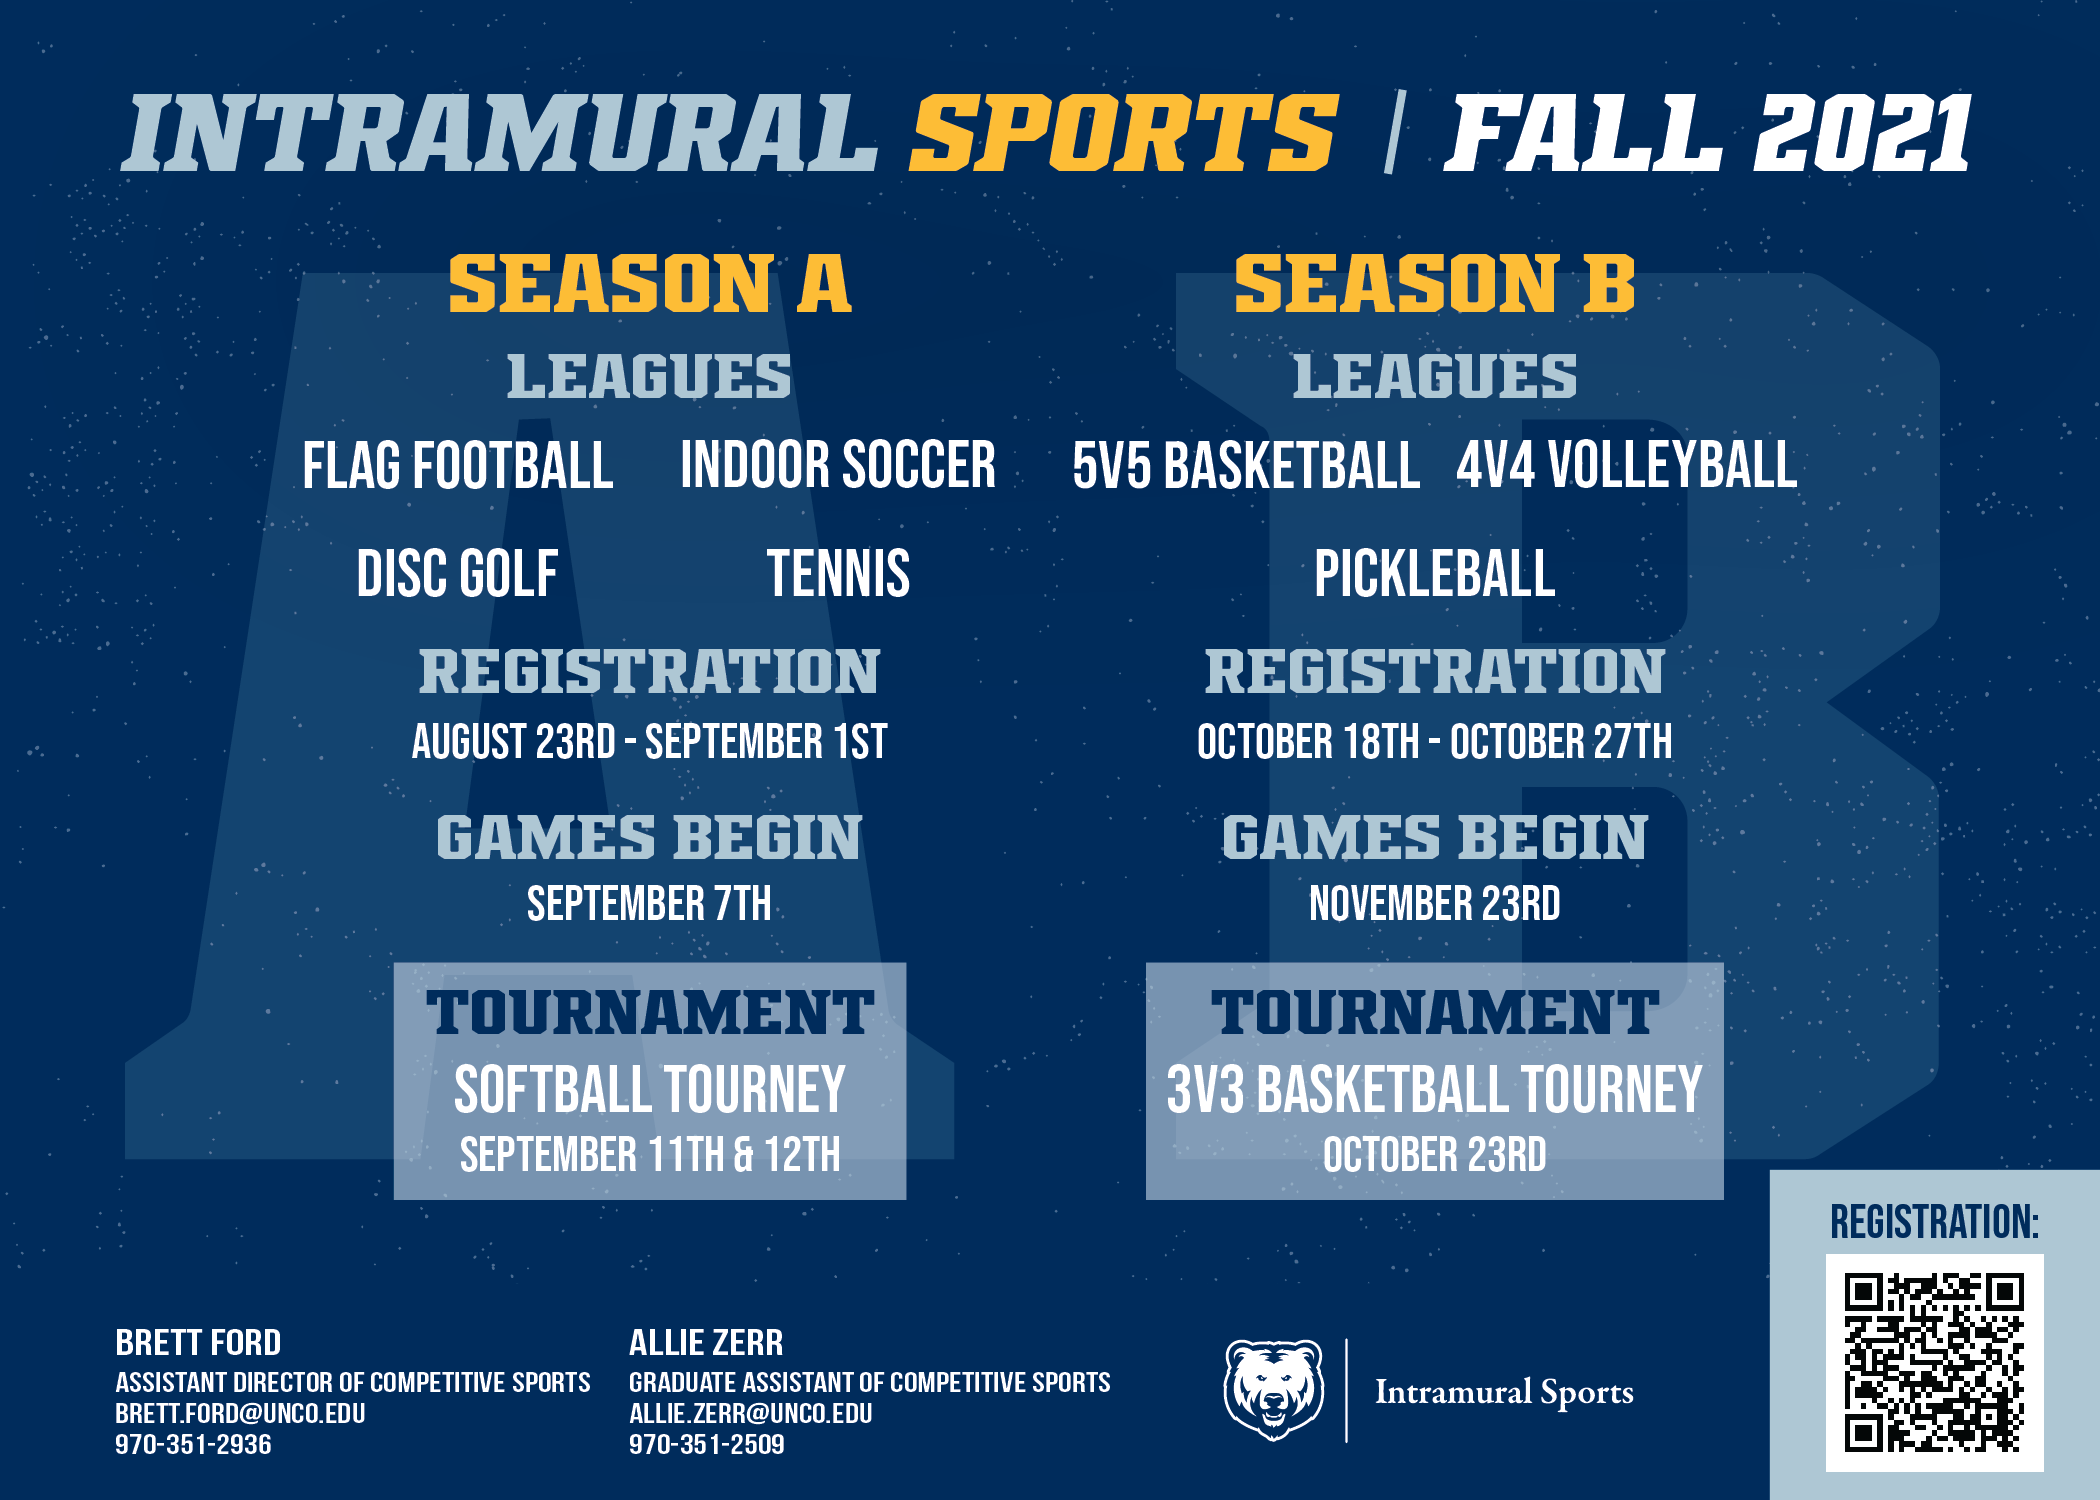 Intramural Sports at UNC